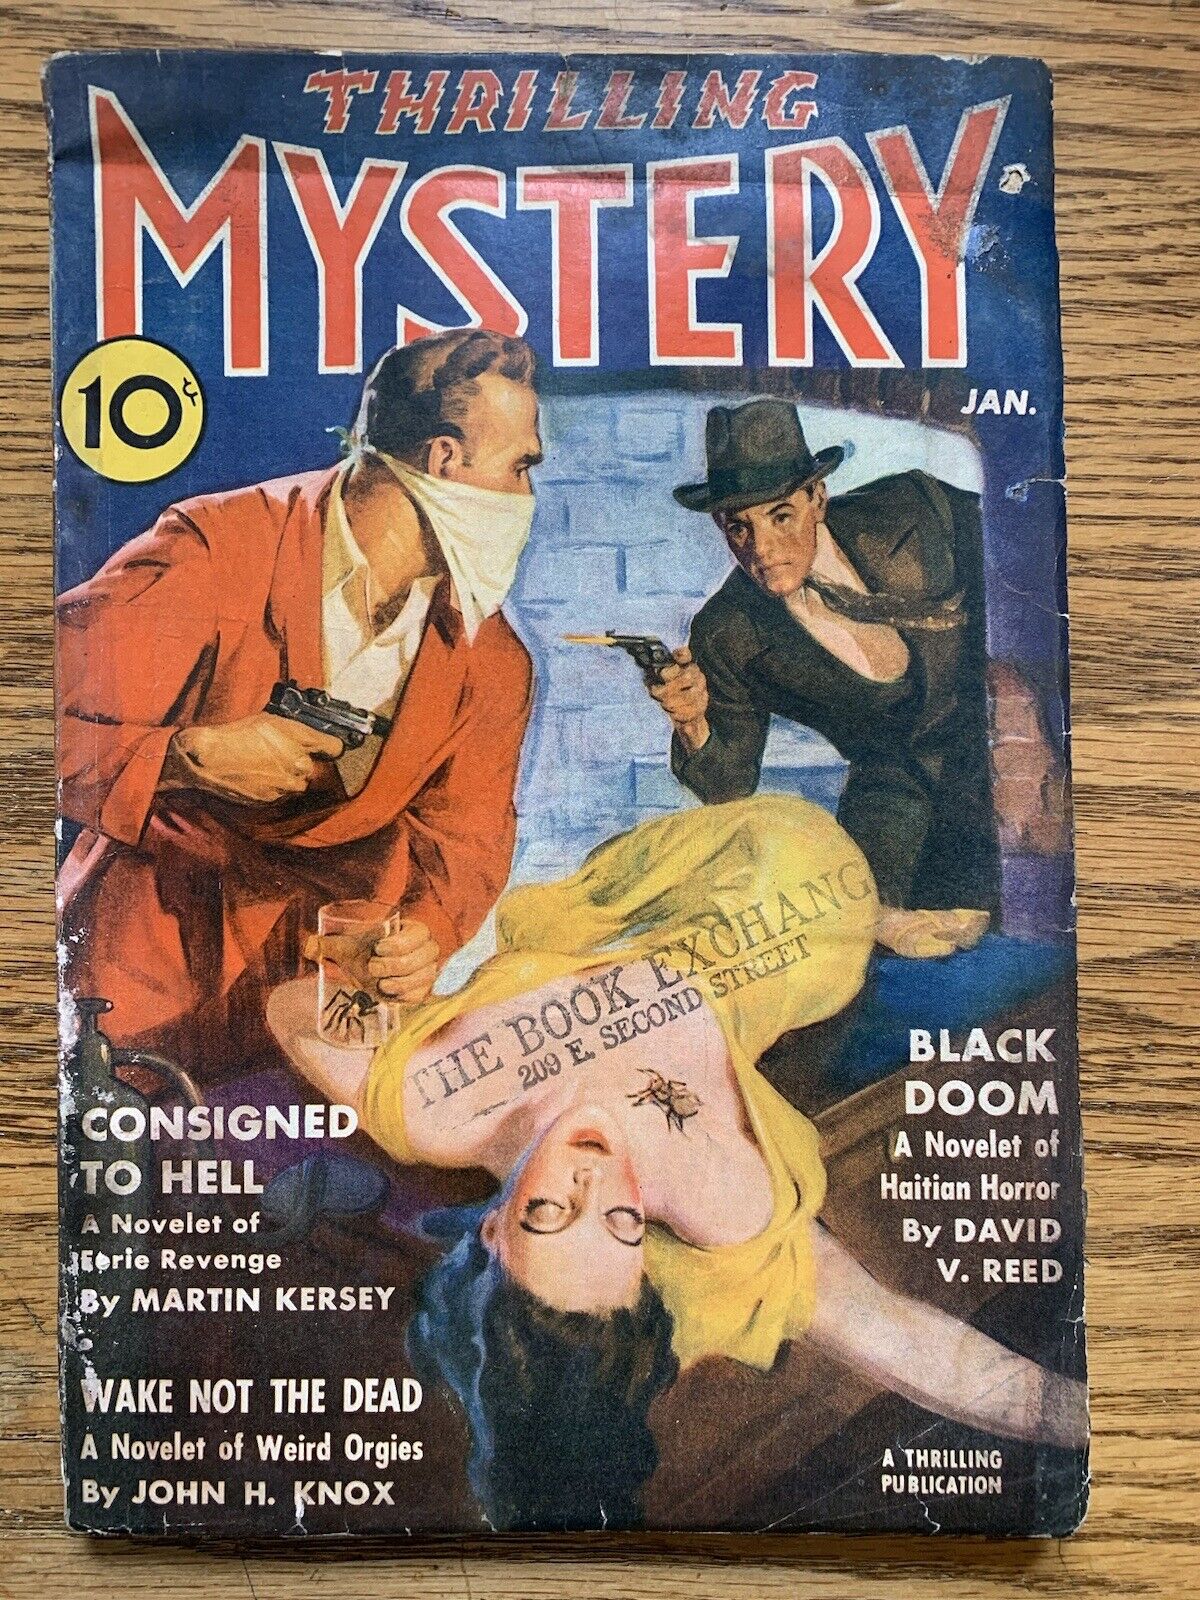 RARE January 1940 THRILLING MYSTERY PULP Classic Cover FN Scarce Issue